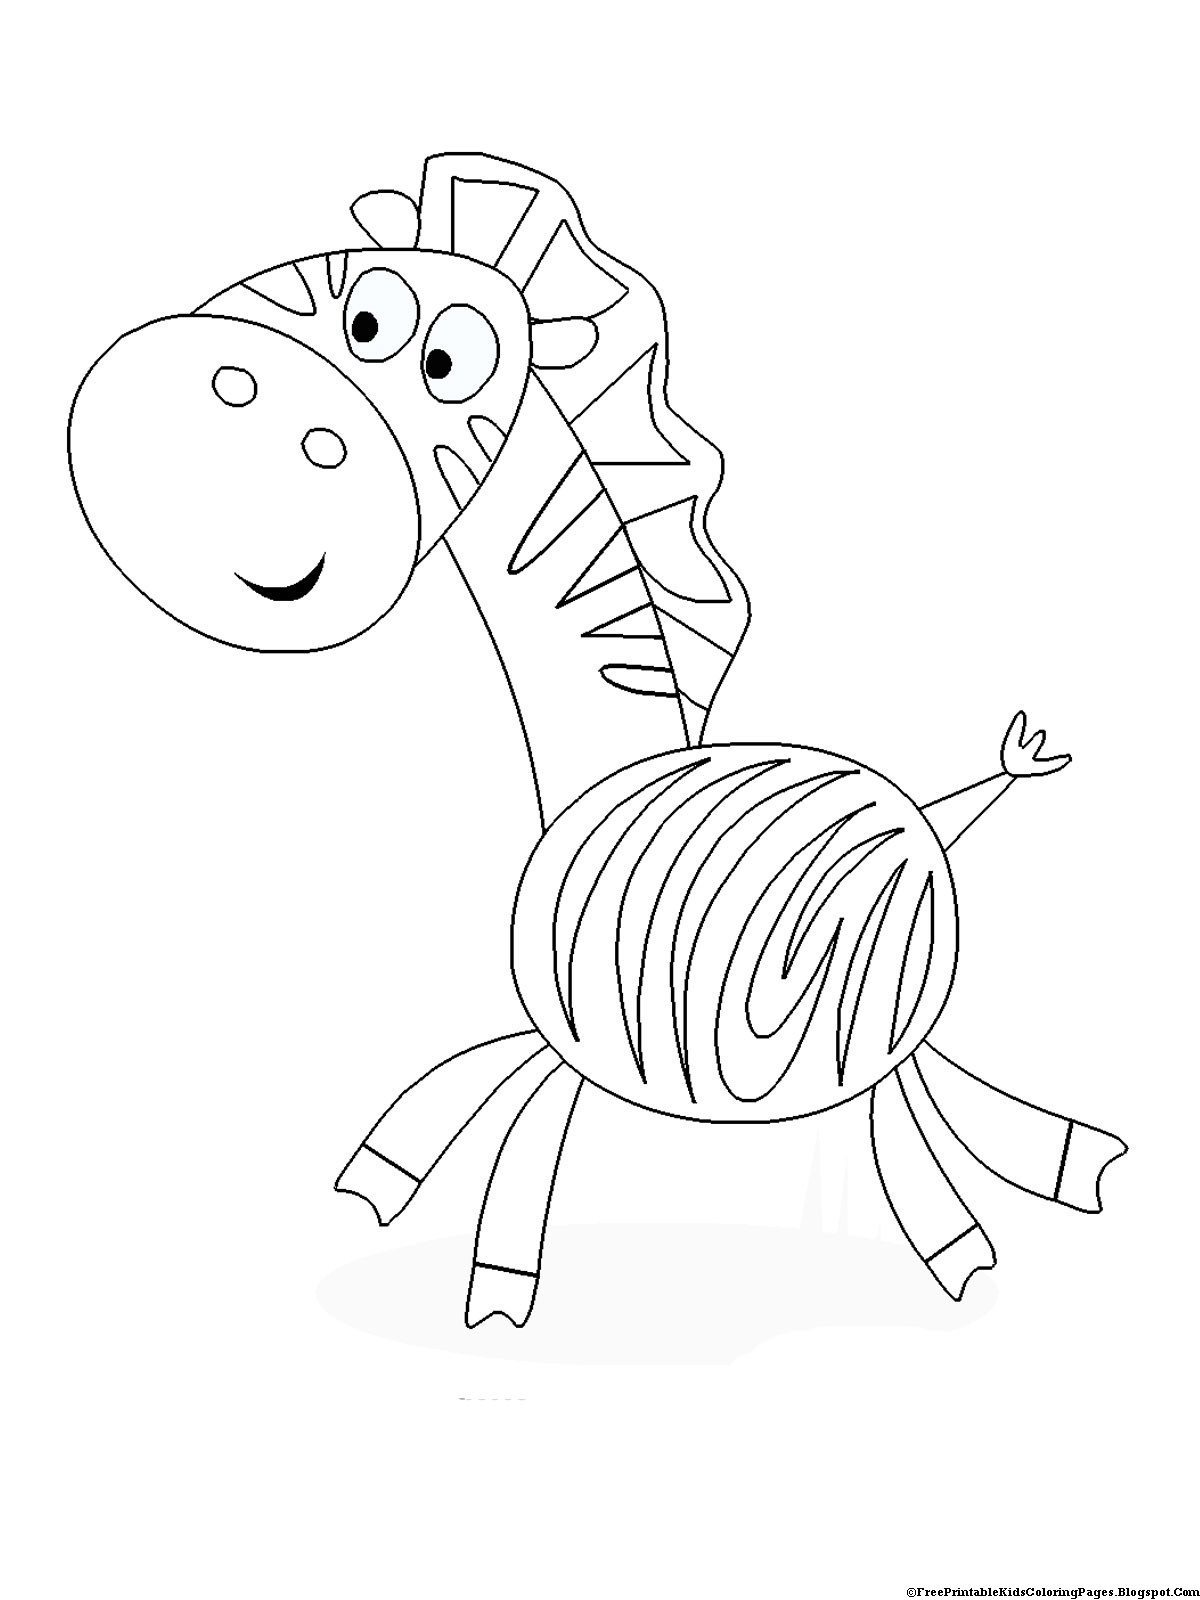 Free Coloring For Kids
 Zebra Coloring Pages Free Printable Kids Coloring Pages